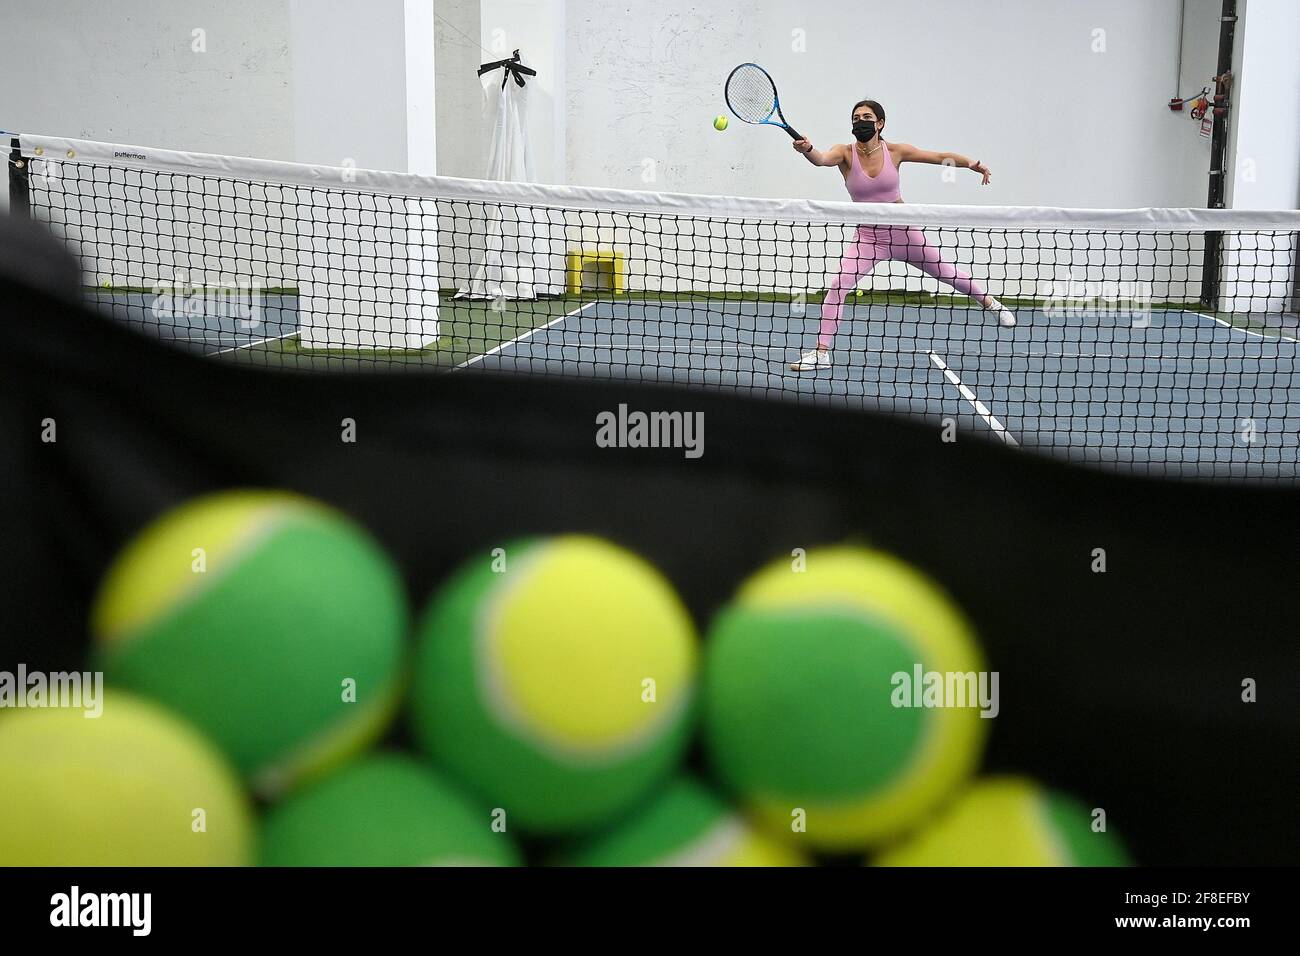 Marielle Halper hits tennis balls while being coached at the Tennis  Innovator courts located on 8th Avenue in Midtown Manhattan, New York, NY,  April 13, 2021. Equipped with an ION/UV virus killing